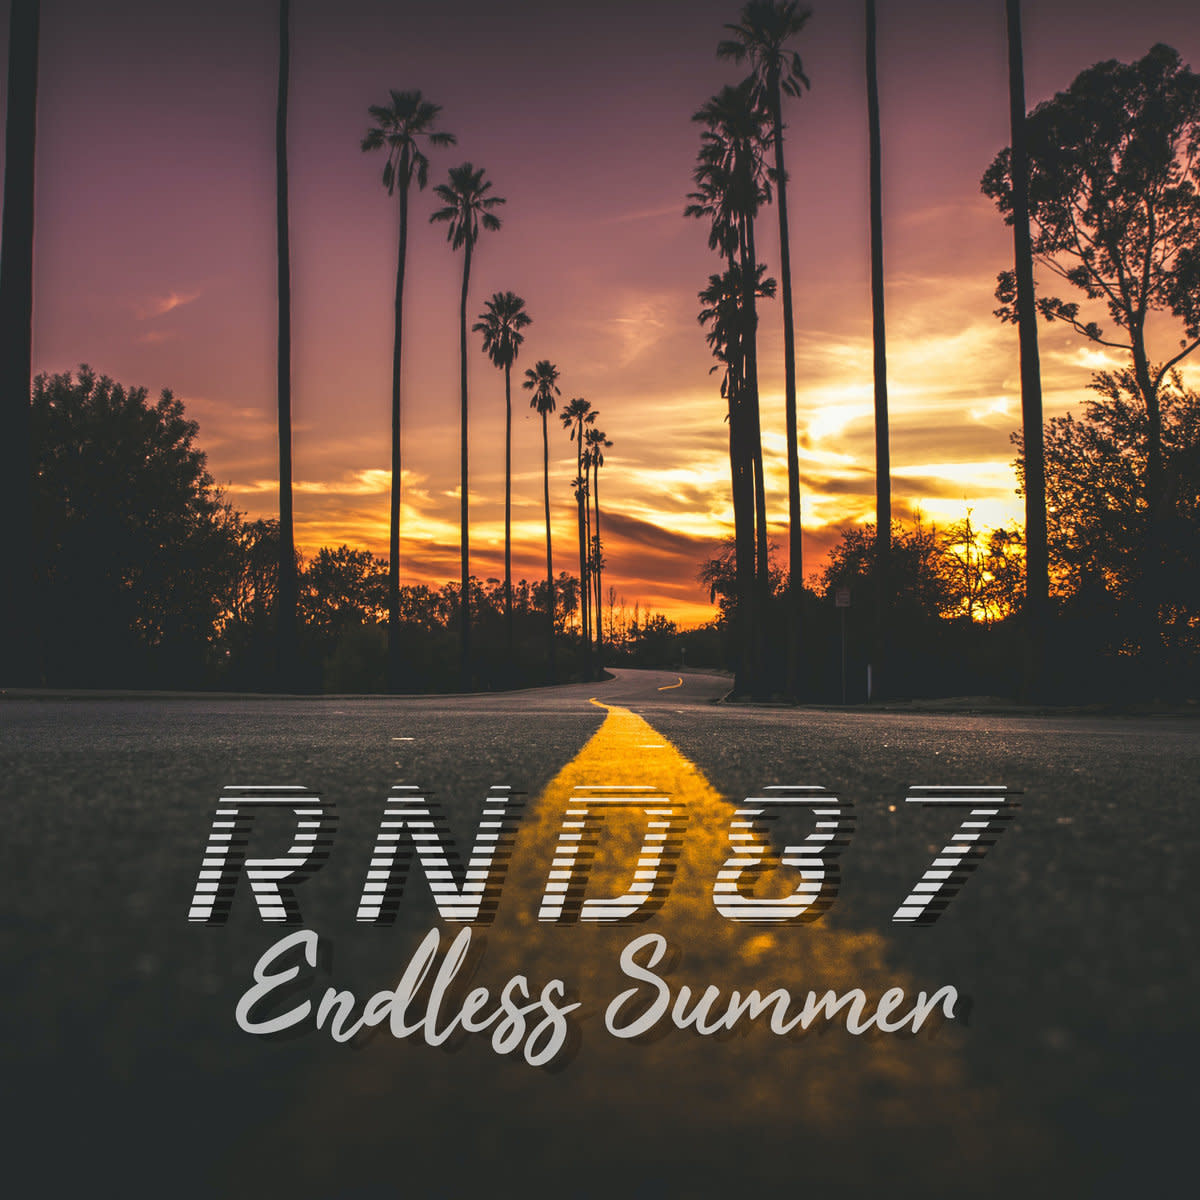 synth-single-review-endless-summer-by-rnd87